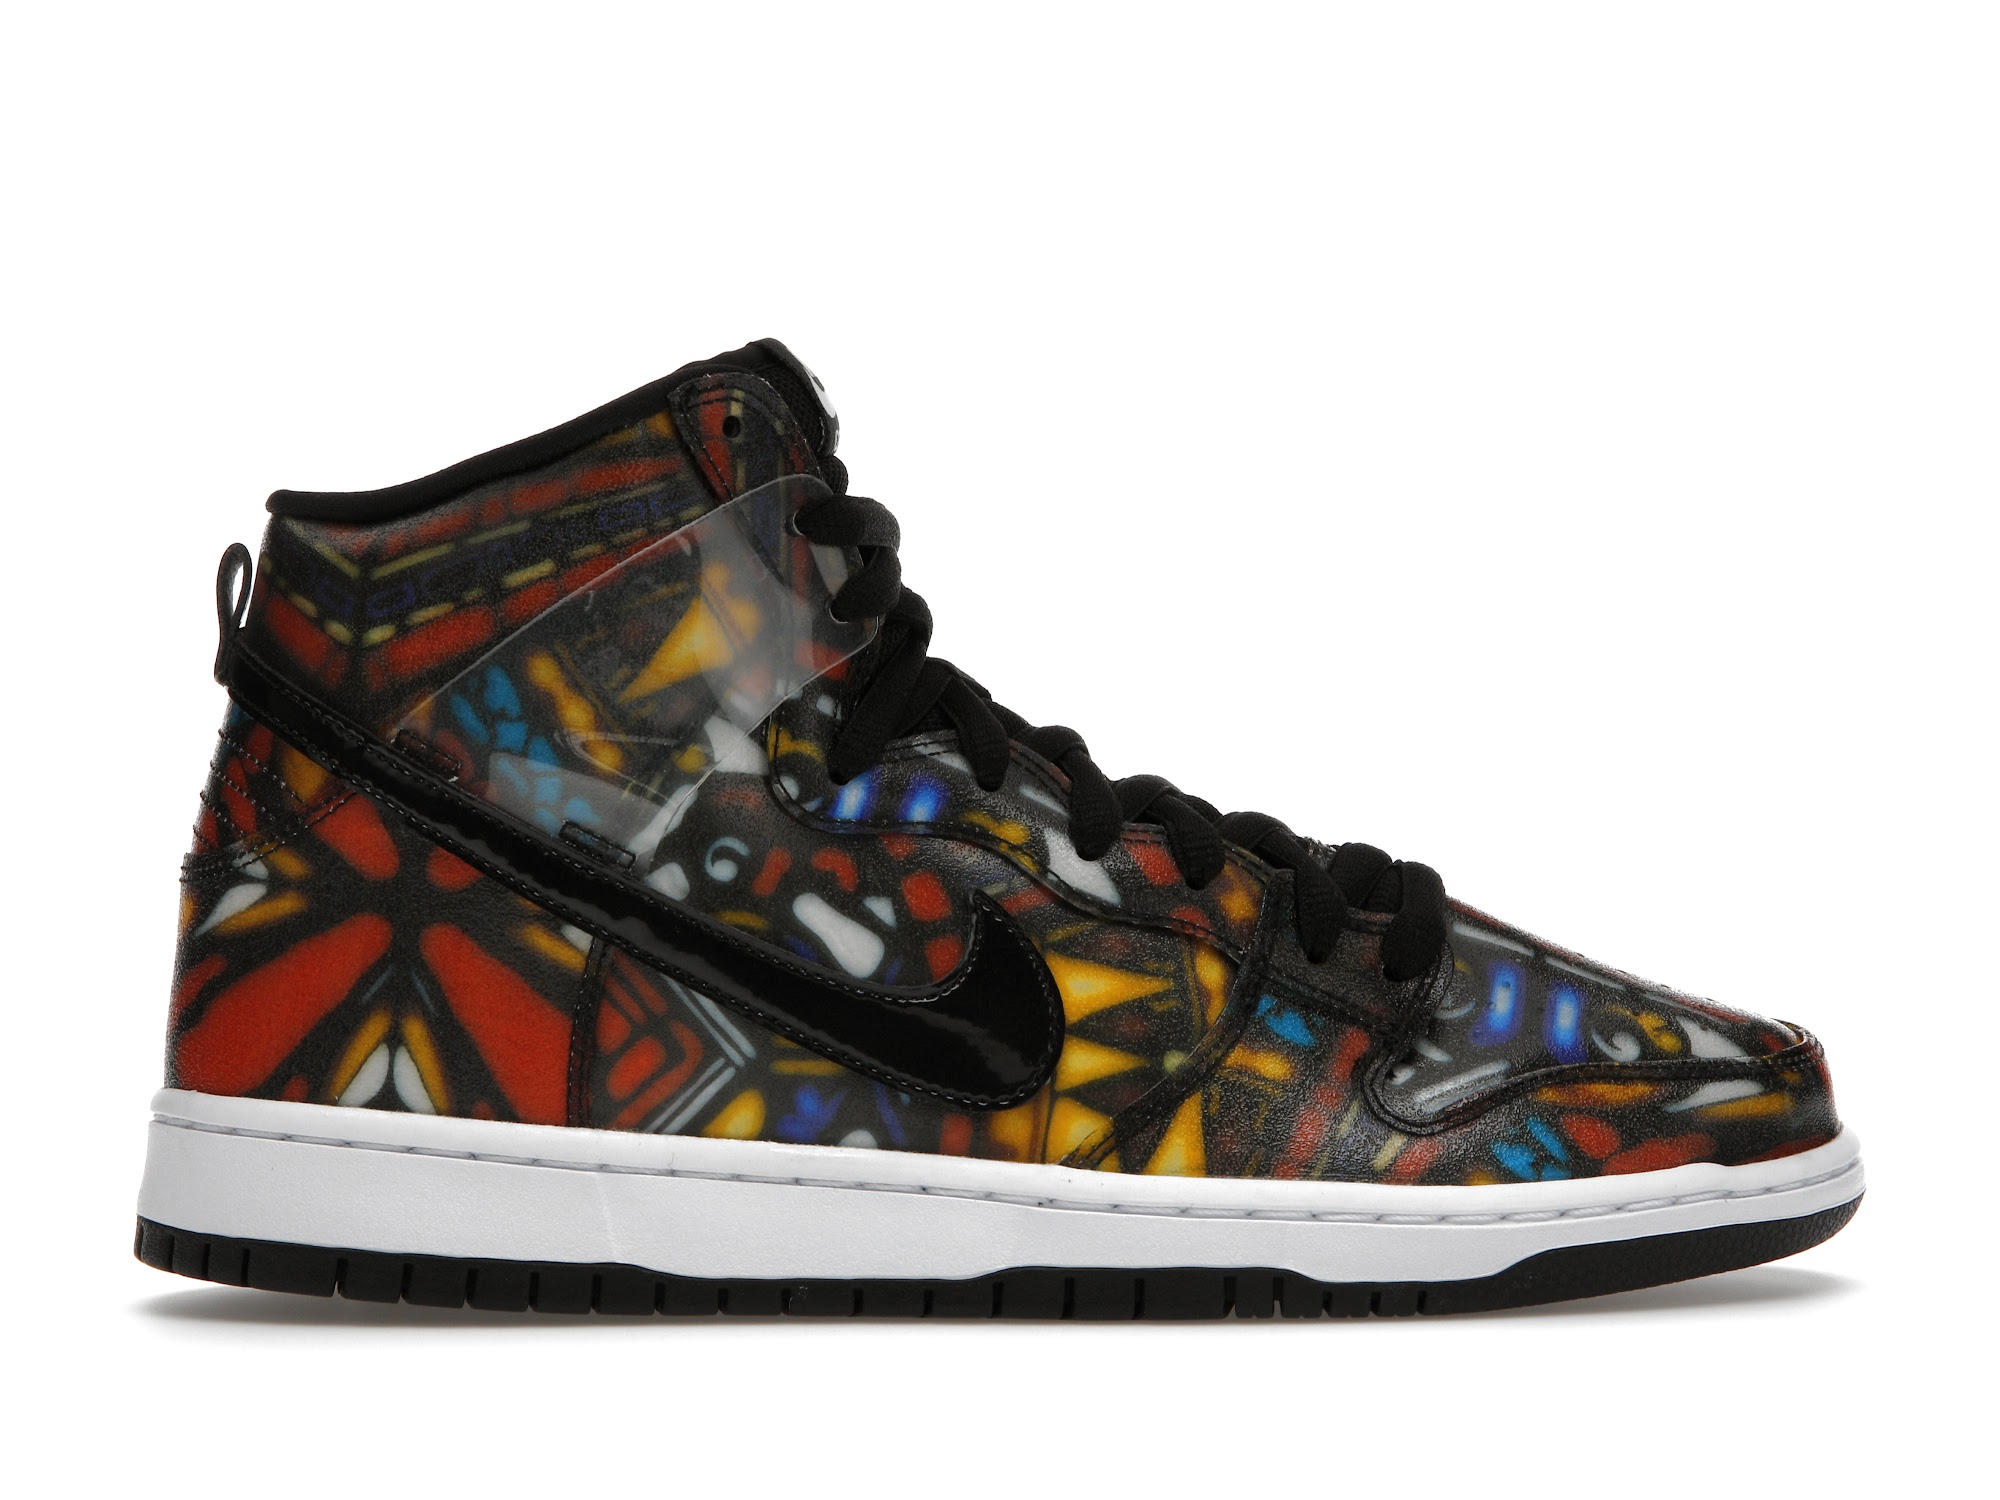 Nike SB Dunk High Concepts Stained Glass Men's - 313171-606 - US